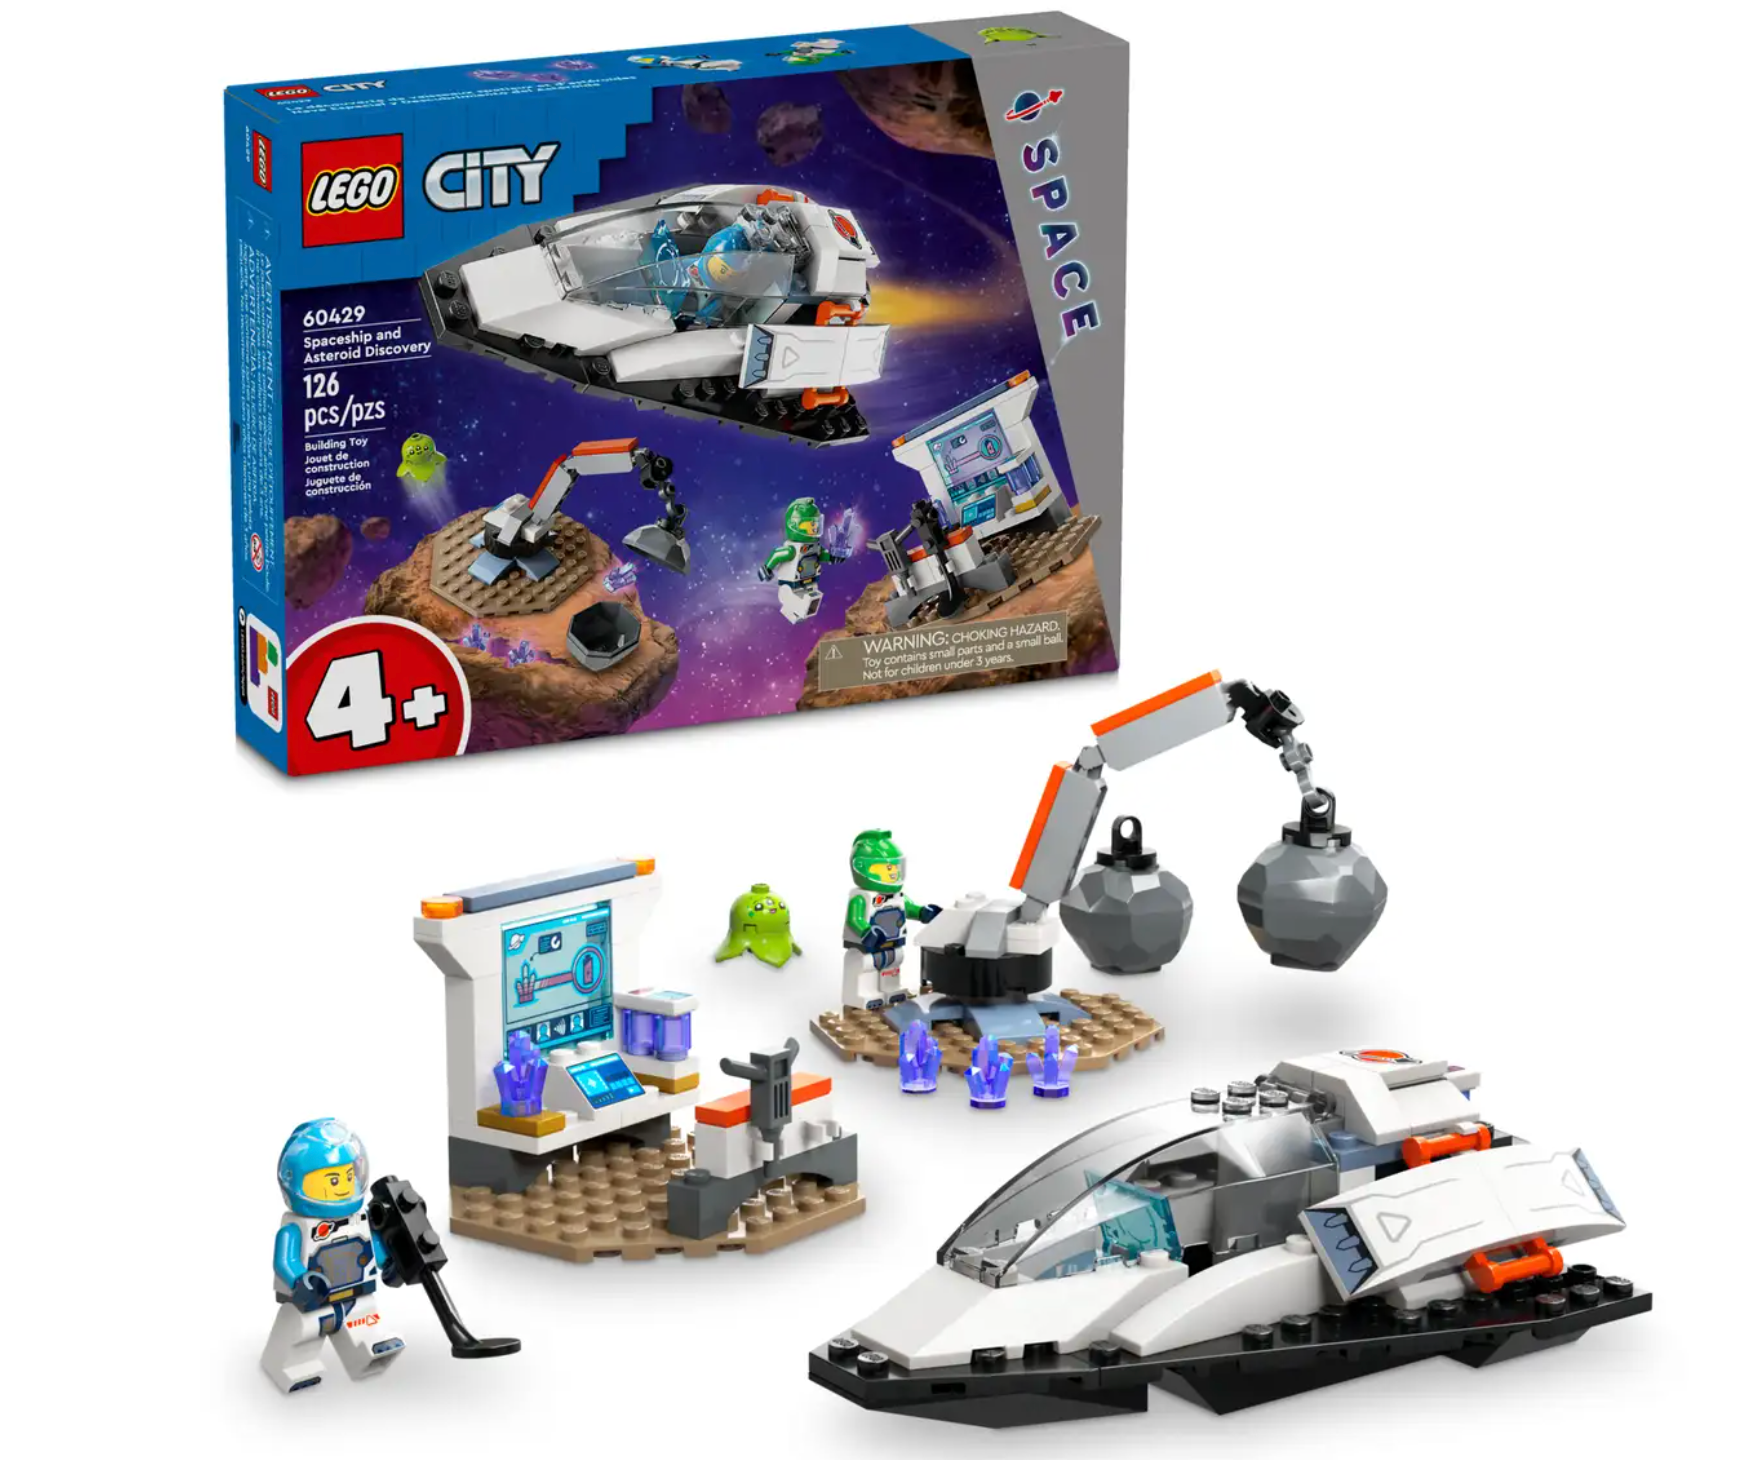 Lego City 60429 Spaceship and Asteroid Discovery